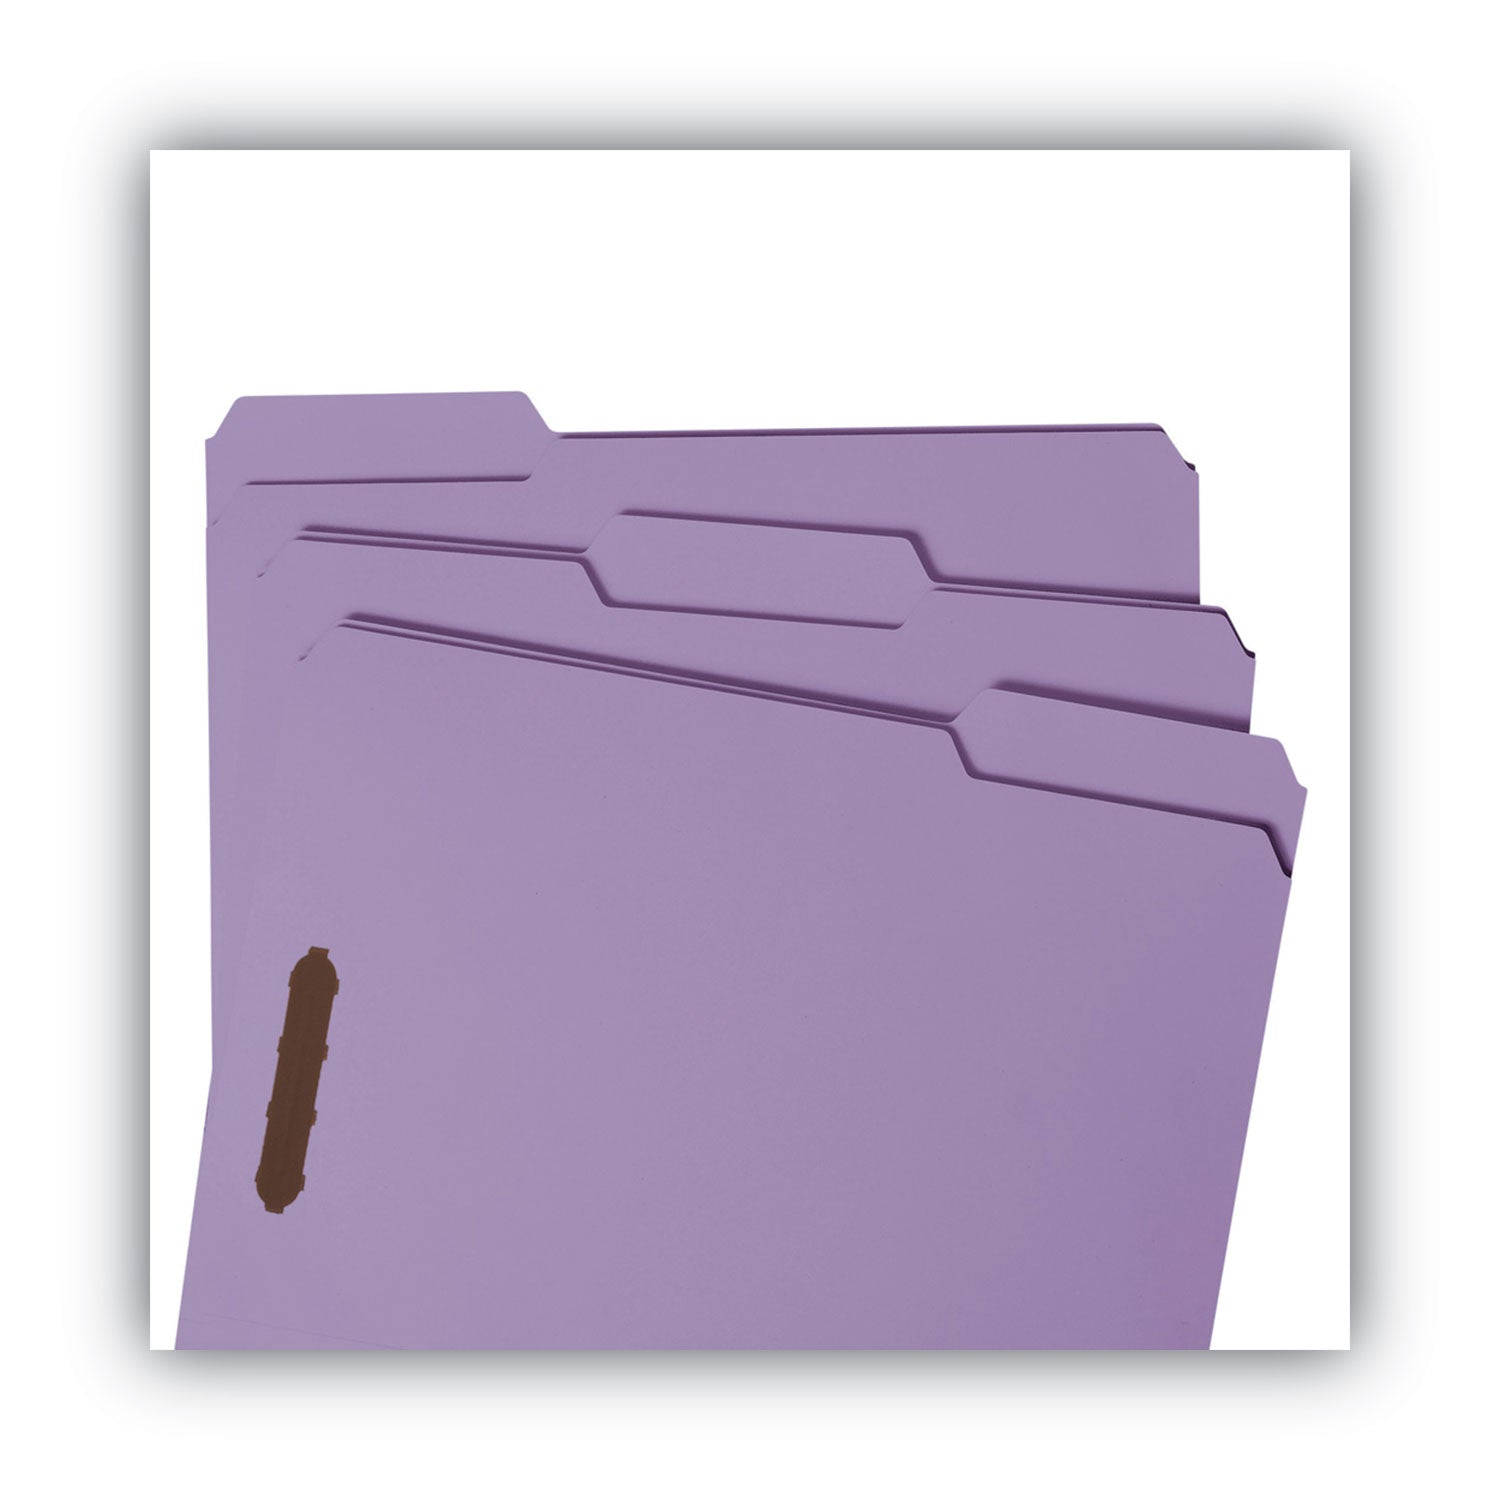 Top Tab Colored Fastener Folders, 0.75" Expansion, 2 Fasteners, Letter Size, Lavender Exterior, 50/Box - 